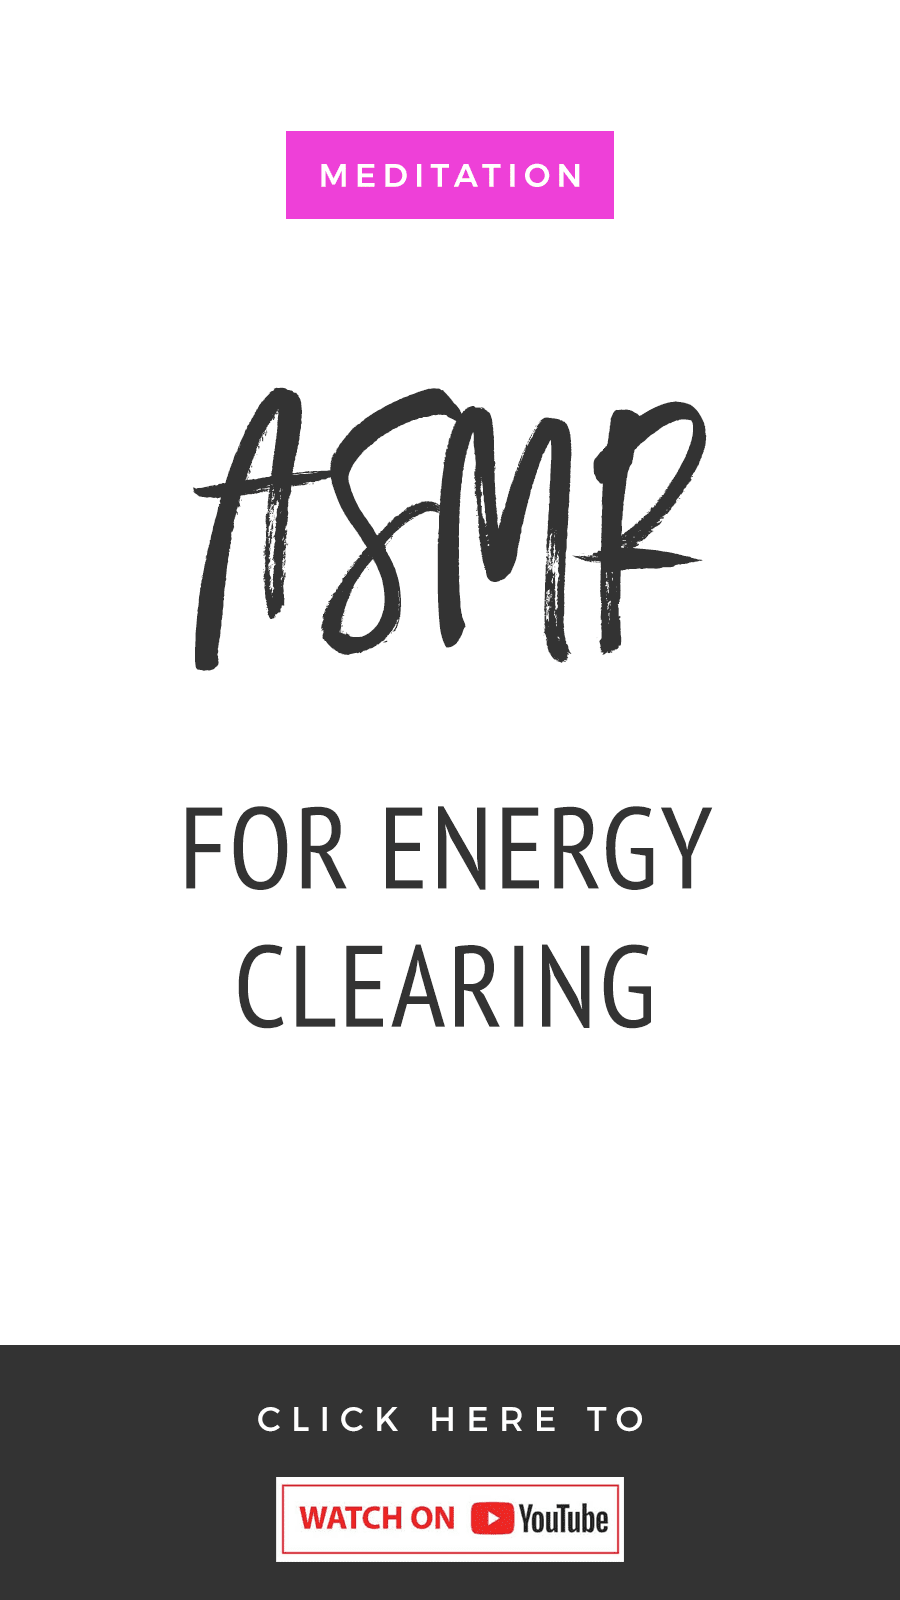 ASMR Meditation For Energy Clearing